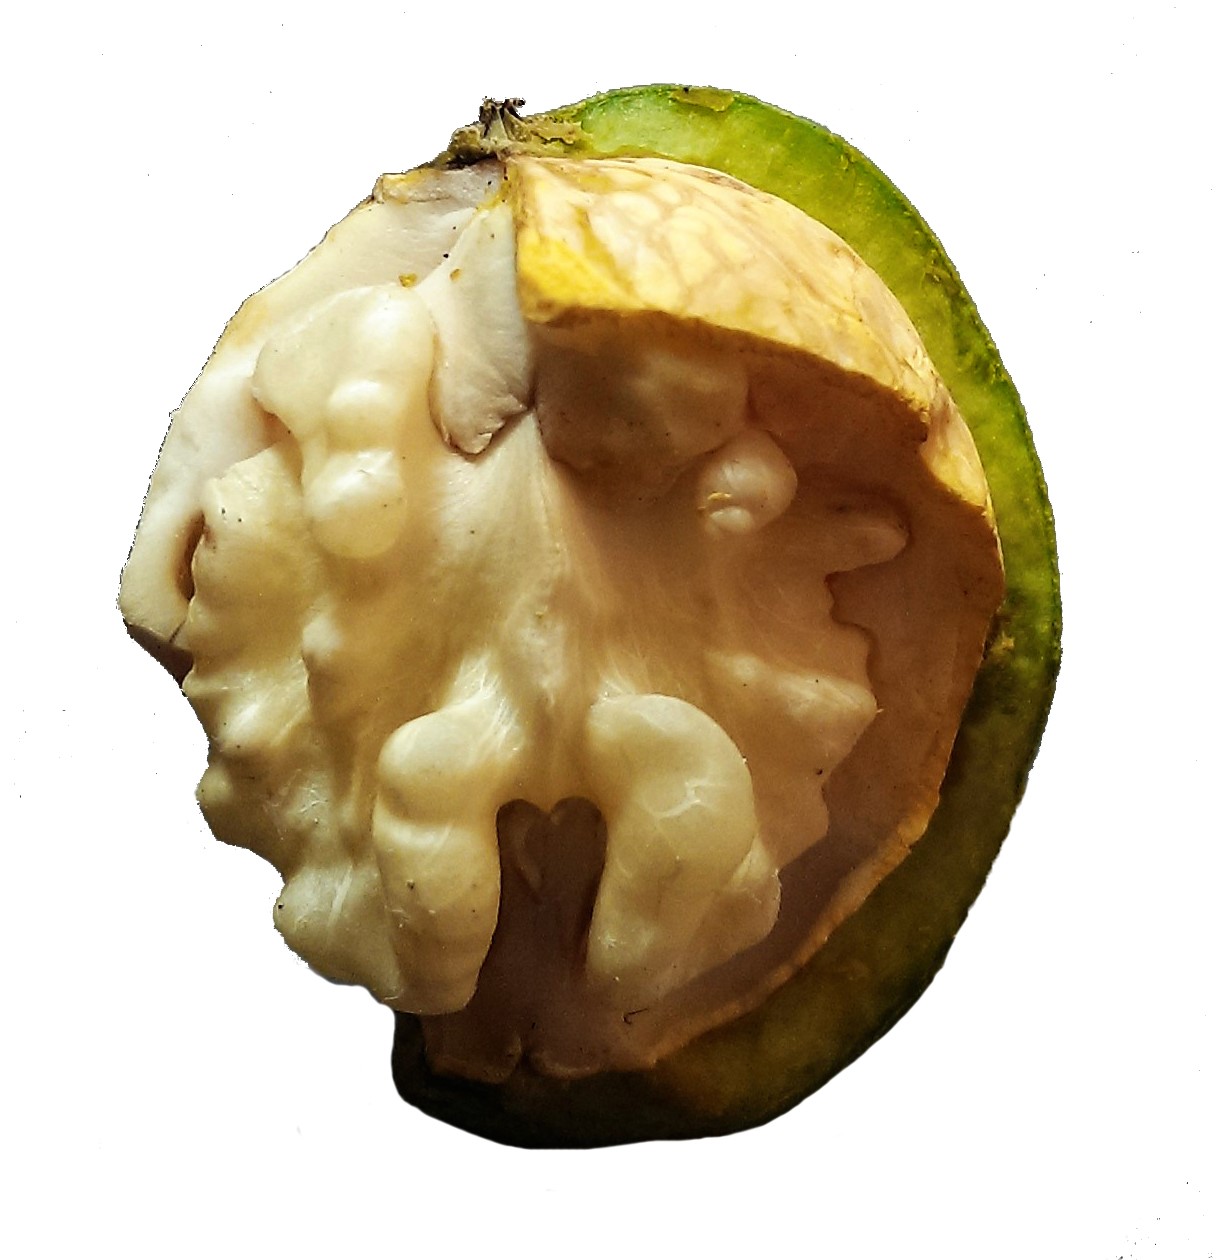 Image: Photo of a walnut, showing the kernel and the shell